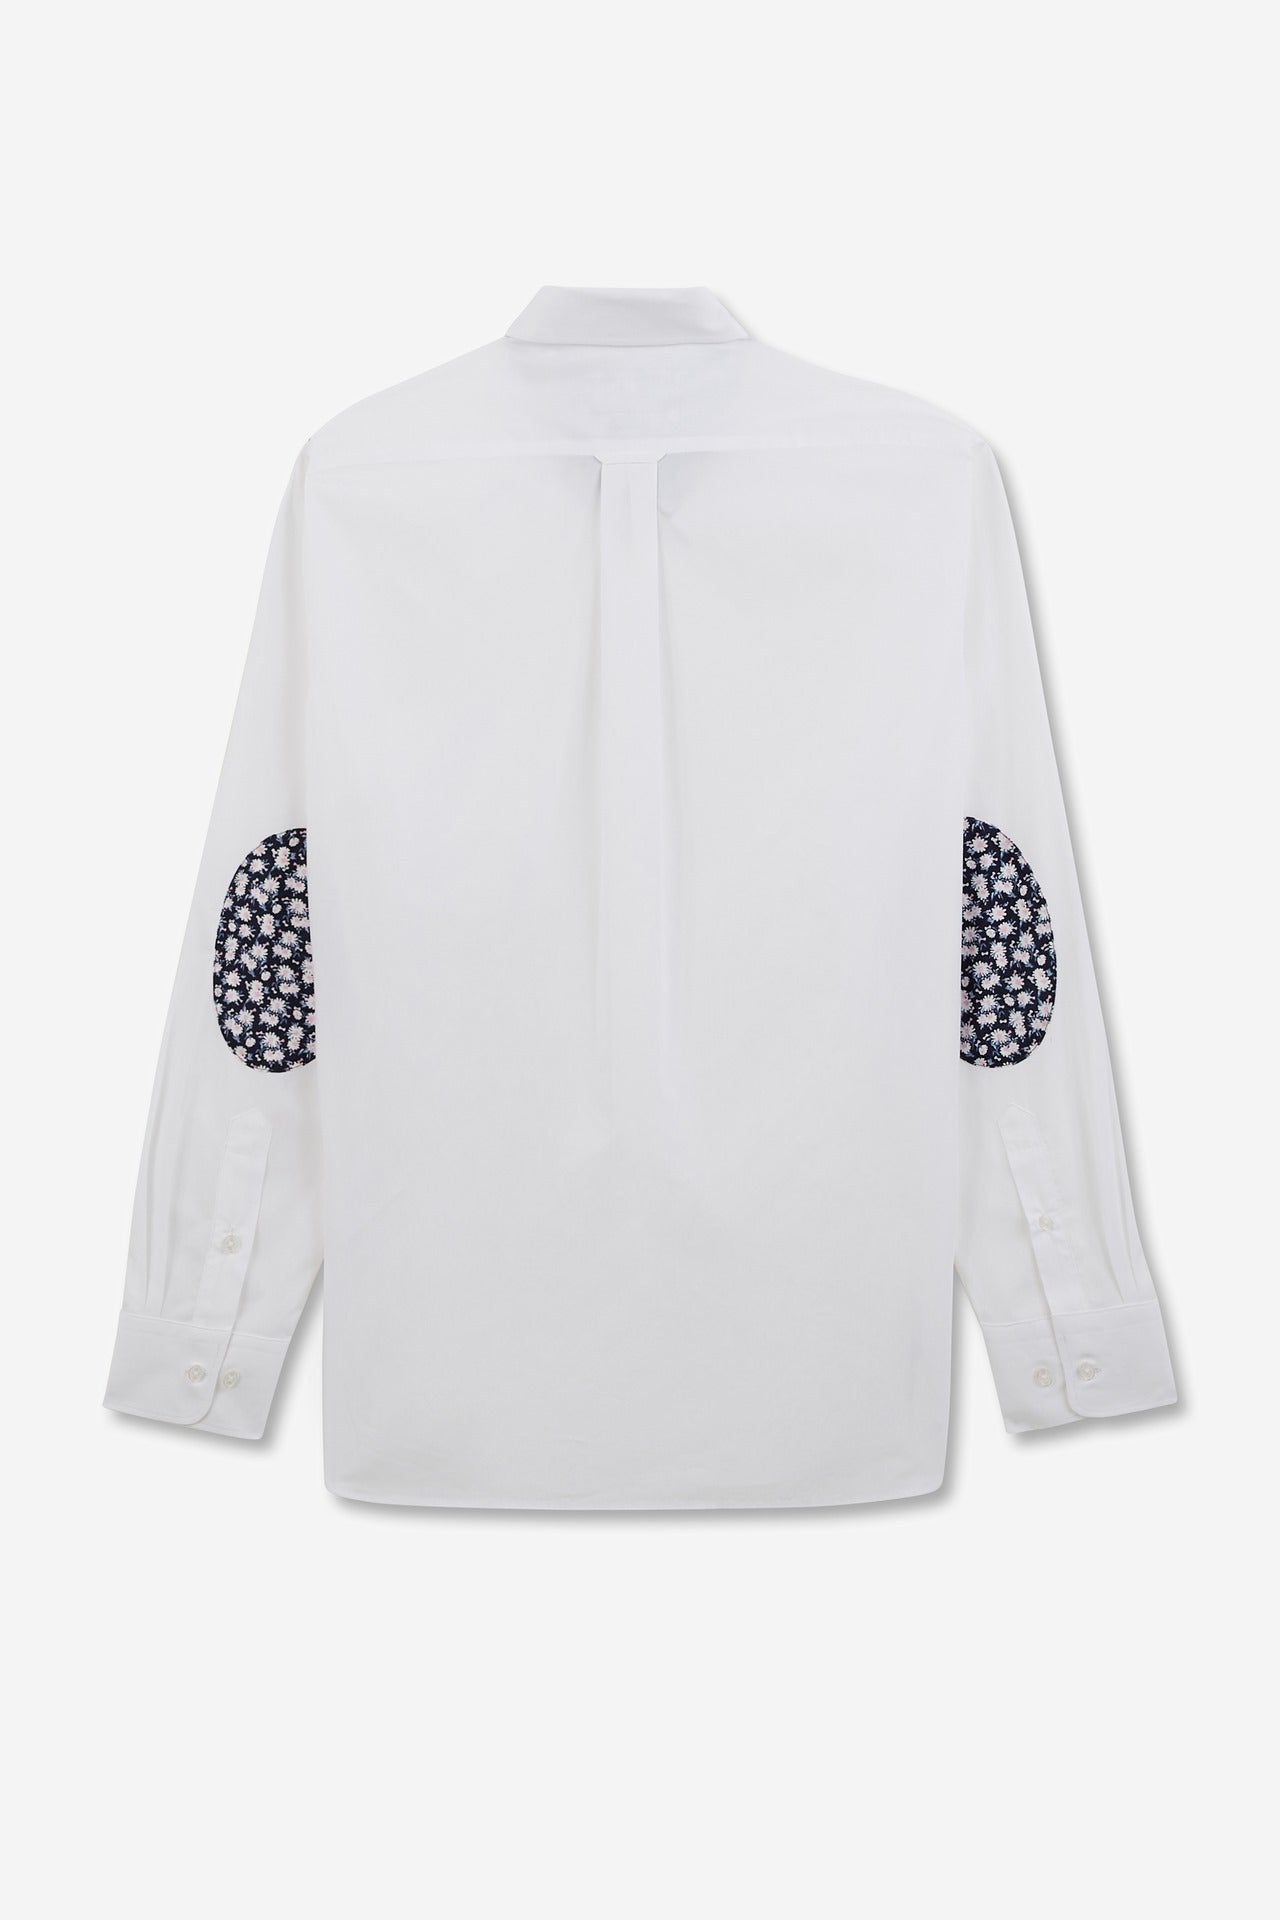 White shirt with floral elbow patches - Image 5